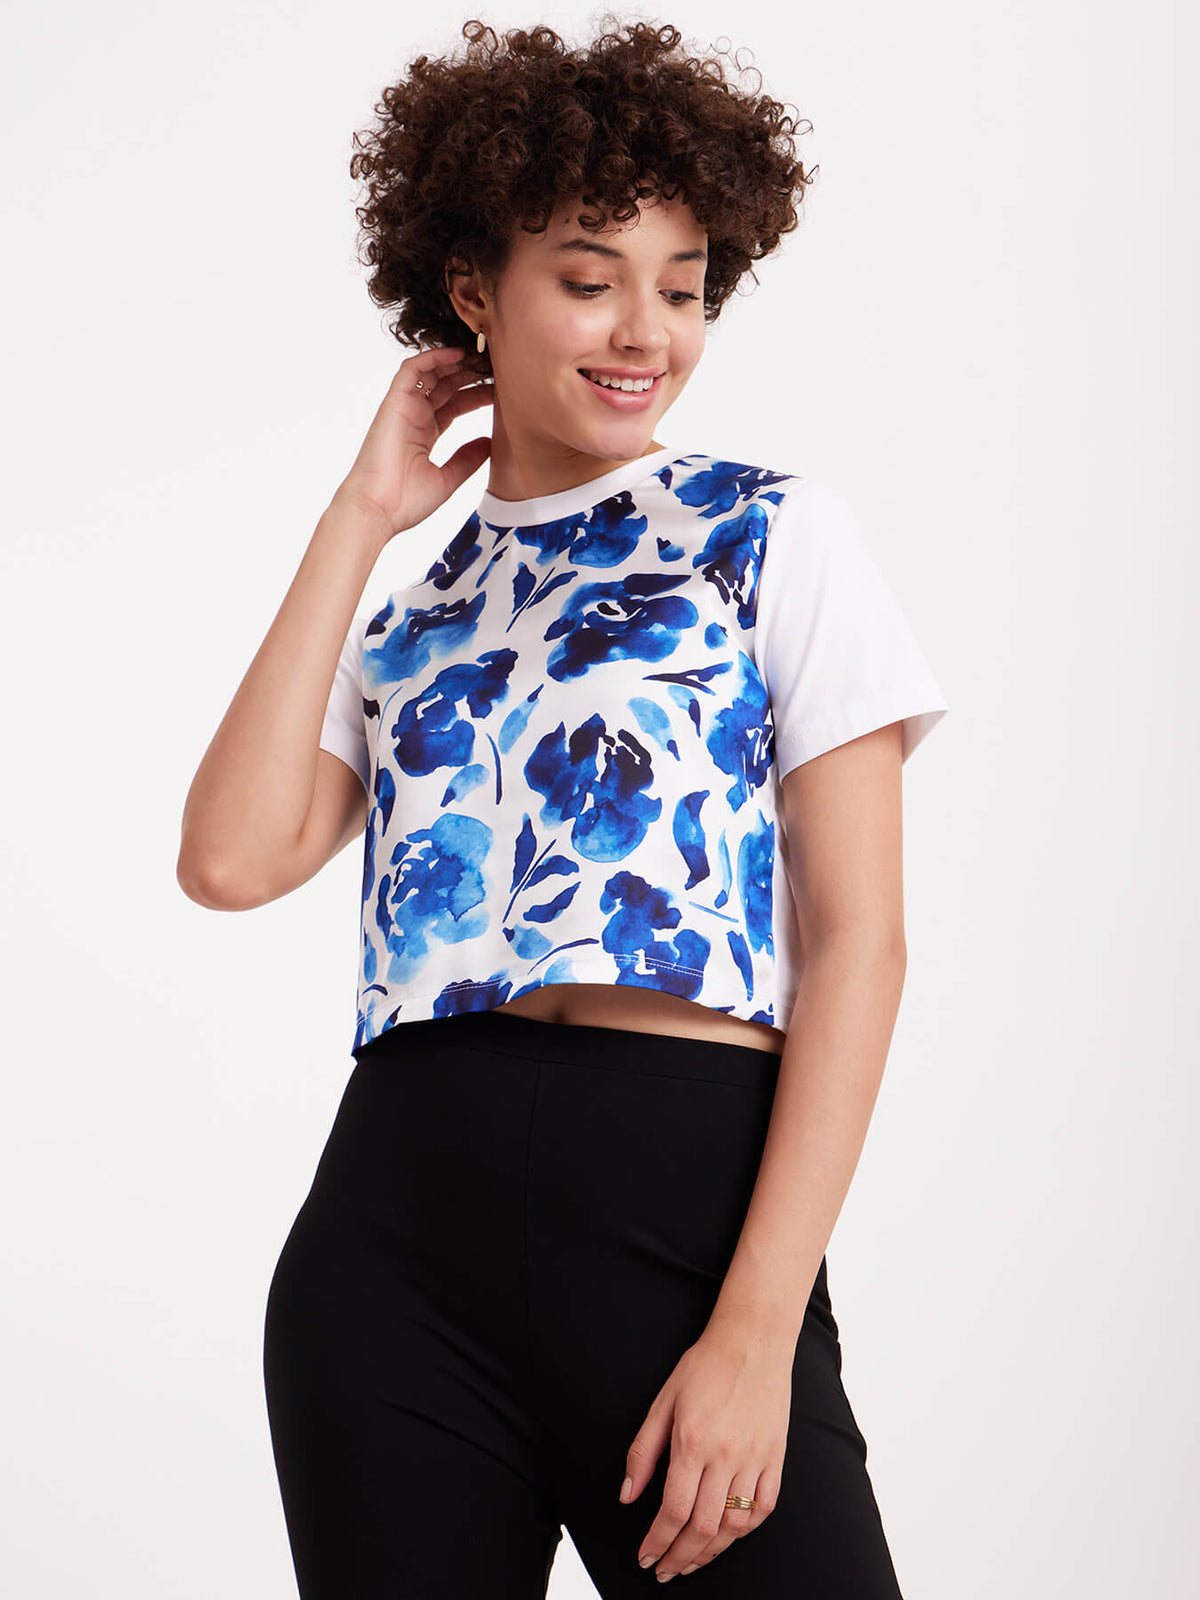 Satin Floral Print Top - Blue And White